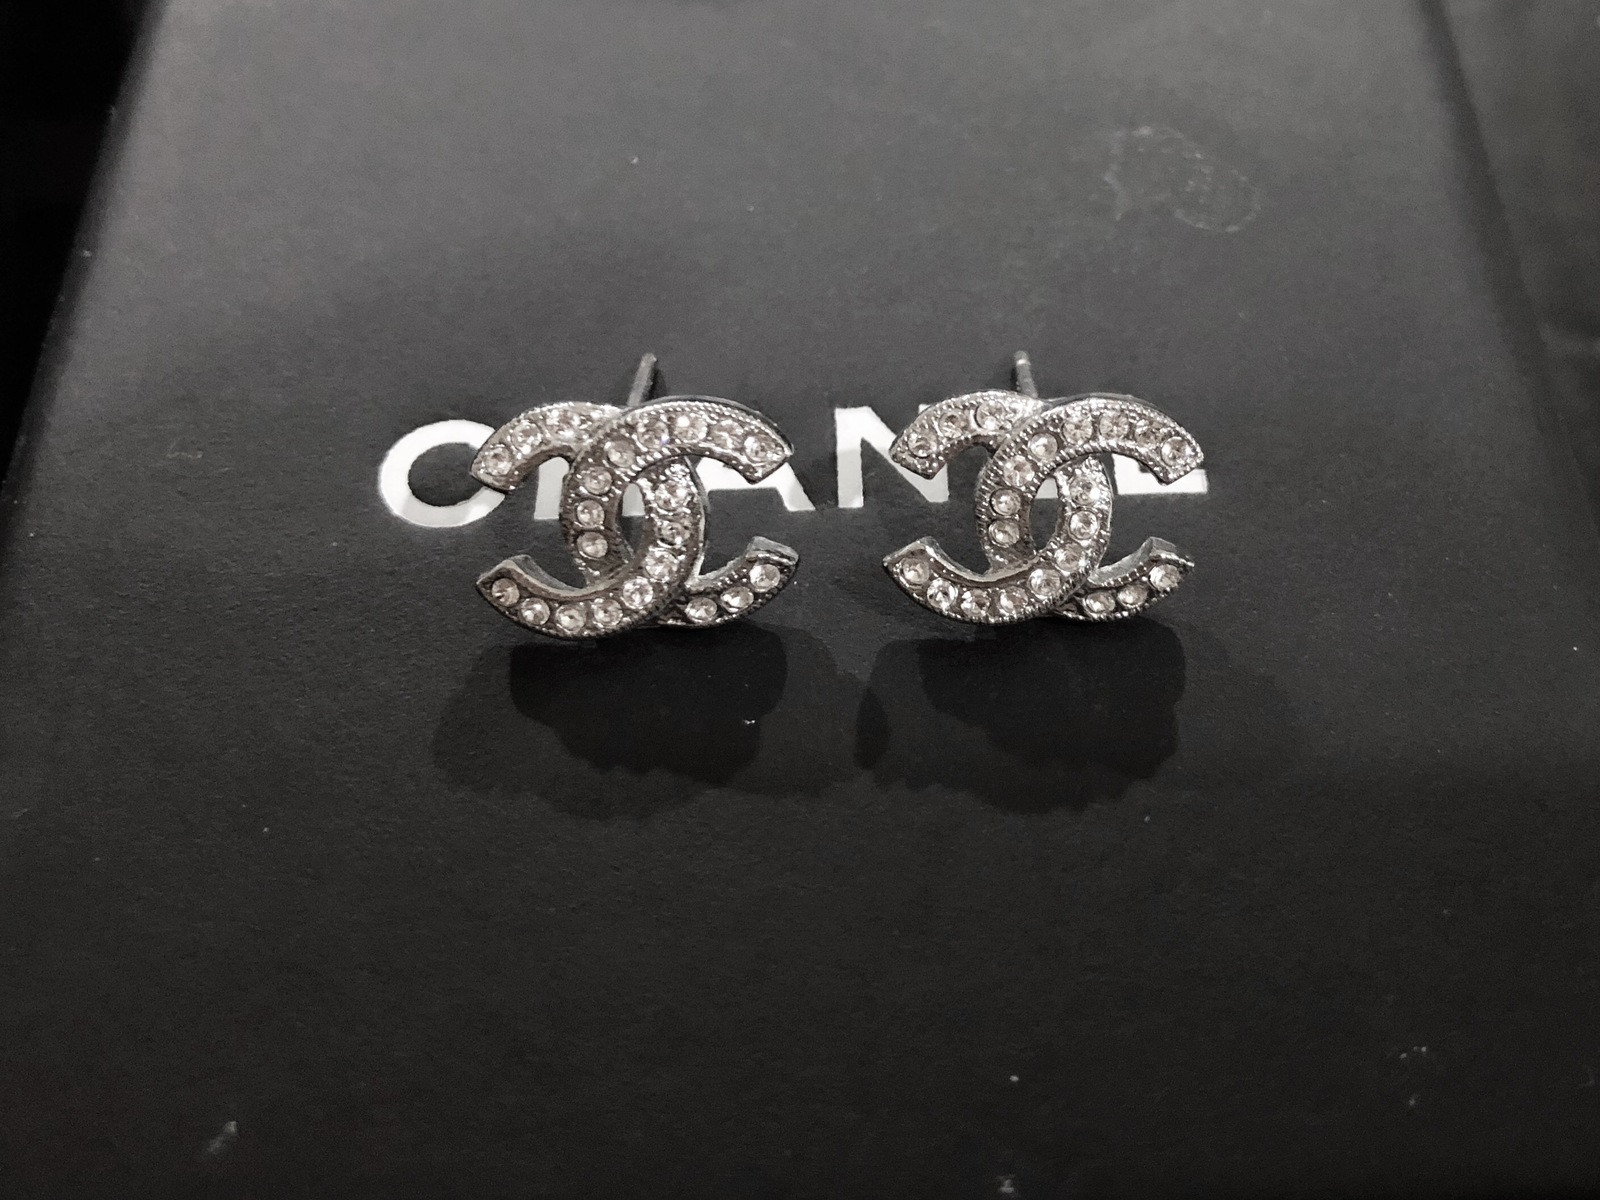 Chanel Cc Logo Earrings
 Authentic Chanel Classic CC Logo Crystal Strass Silver